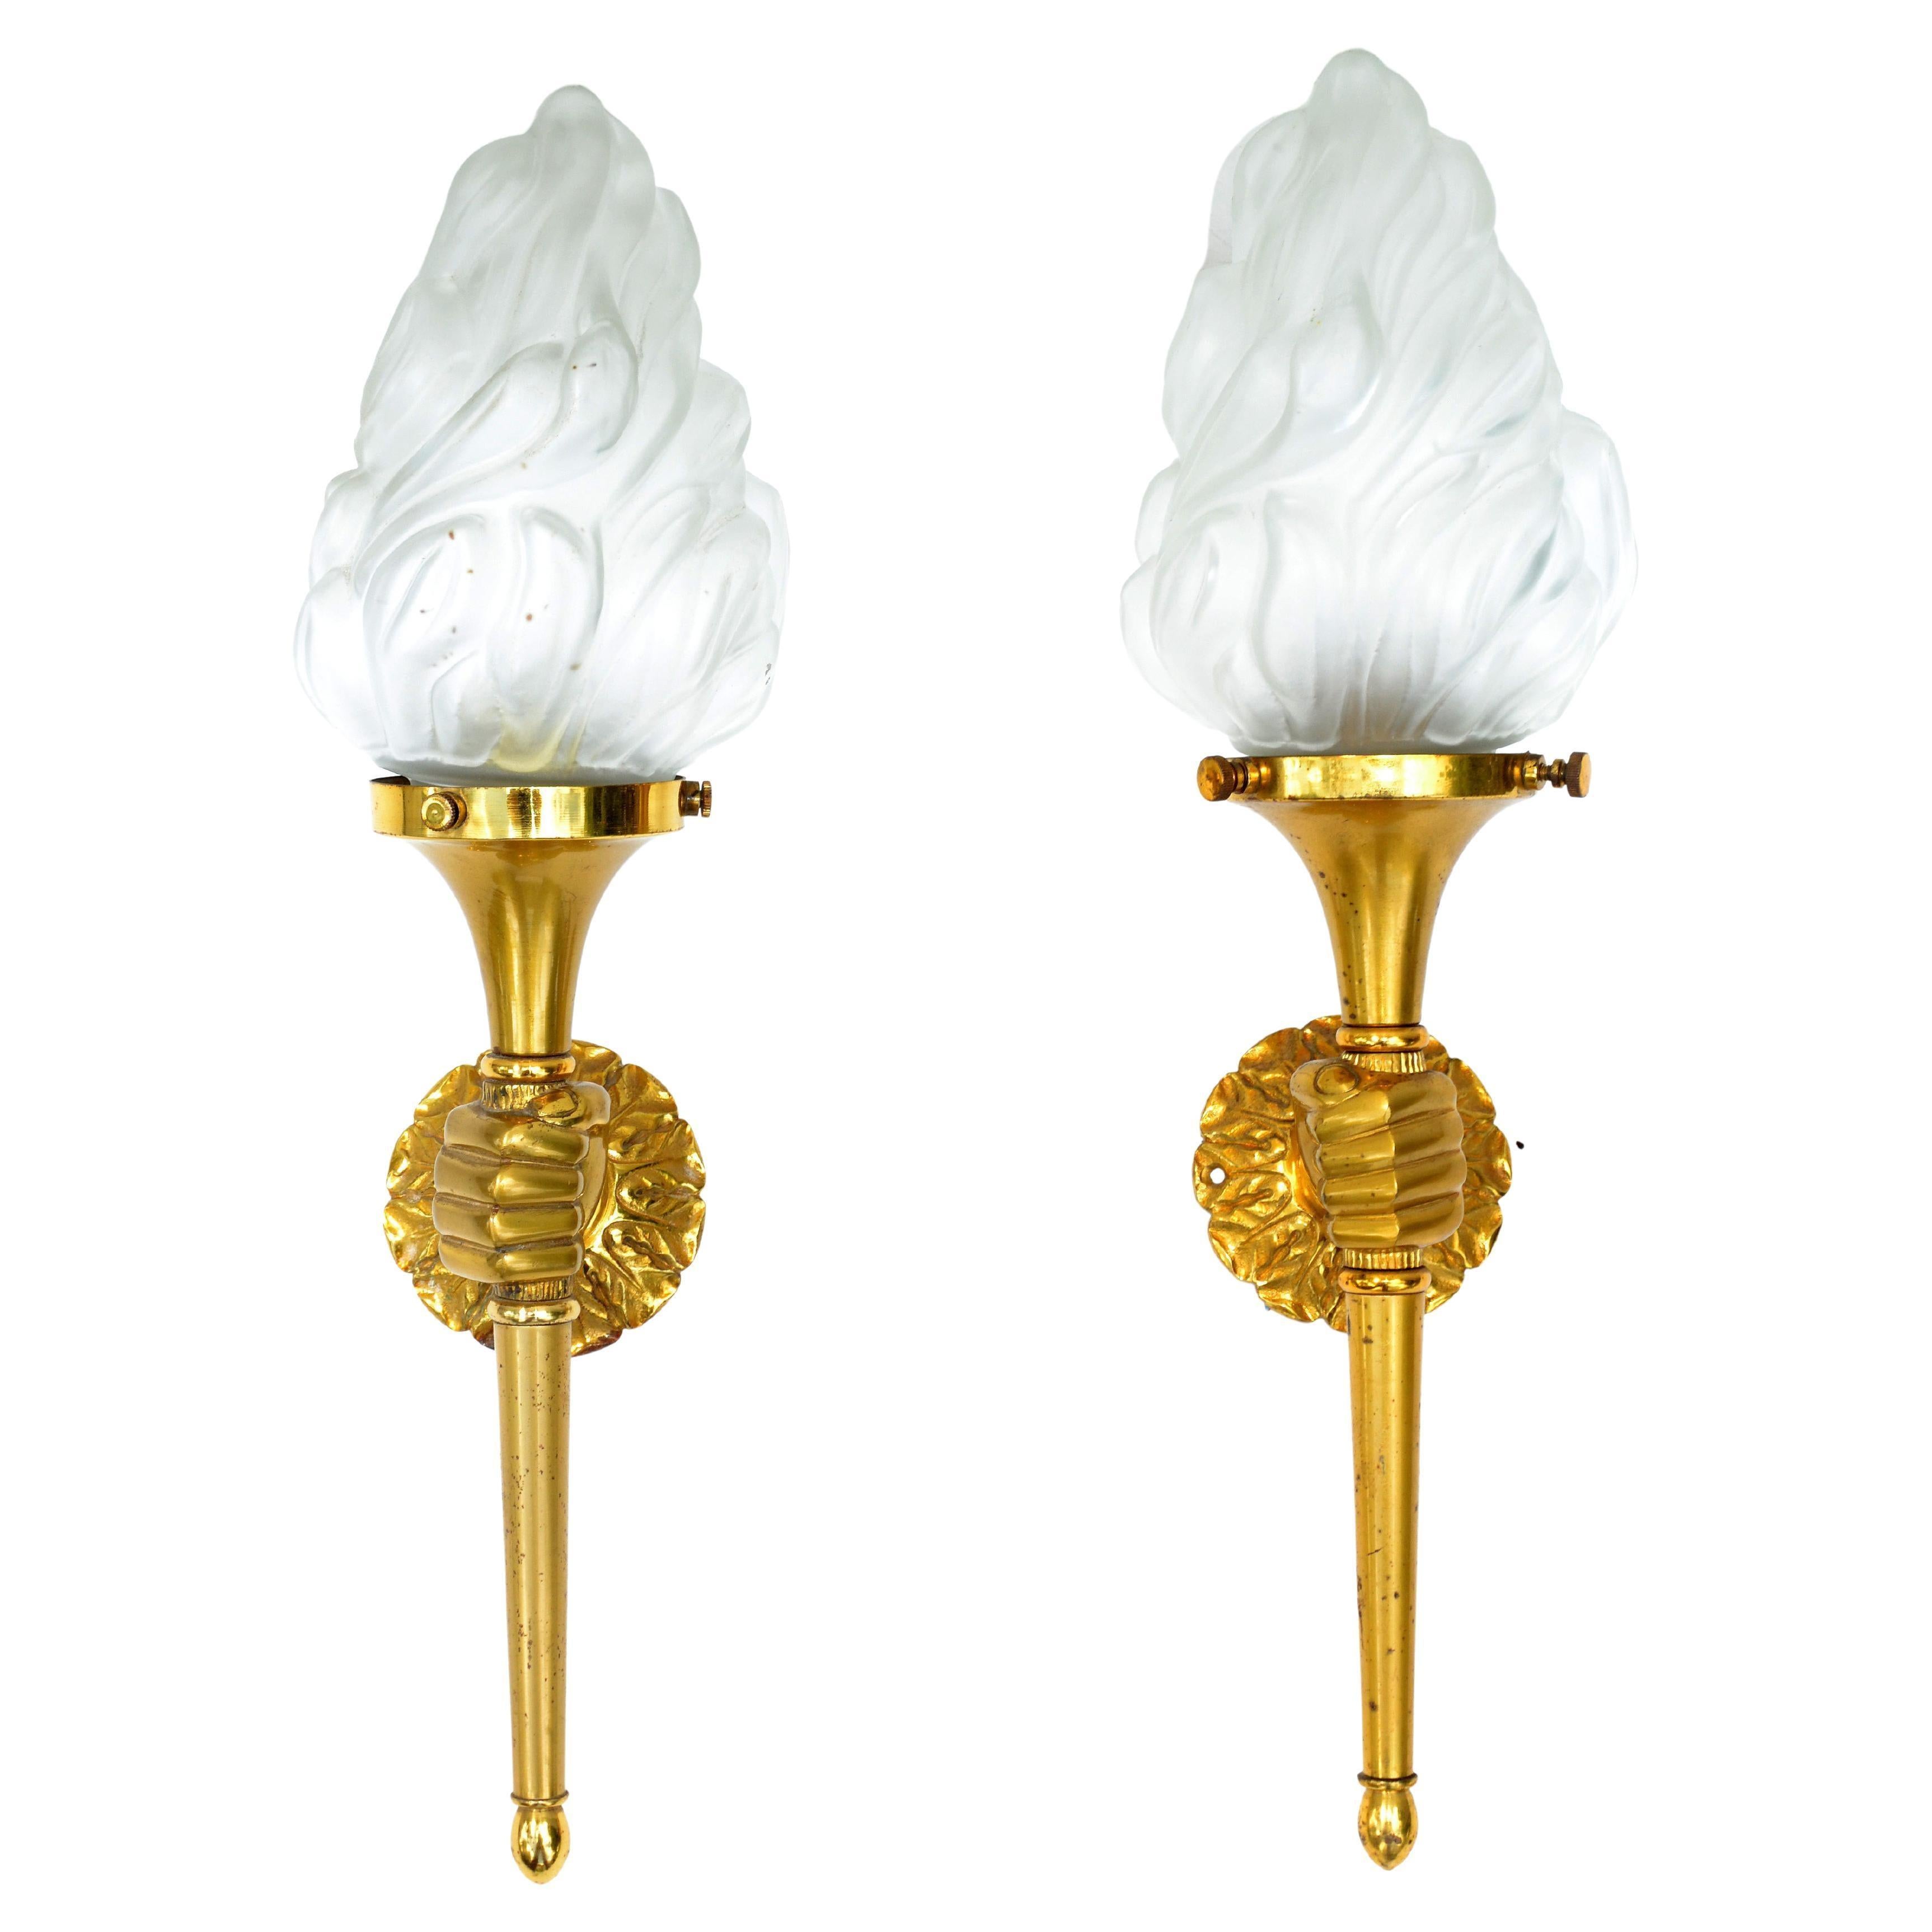 Superb pair of Maison Arlus hand sconce holding a Torch topped with blown glass shade.
Perfect working condition and each Wall Light takes 1 light bulb with max 40 watts. 
Back Plate measures: 3 inches Diameter. Custom back plate available.
Have